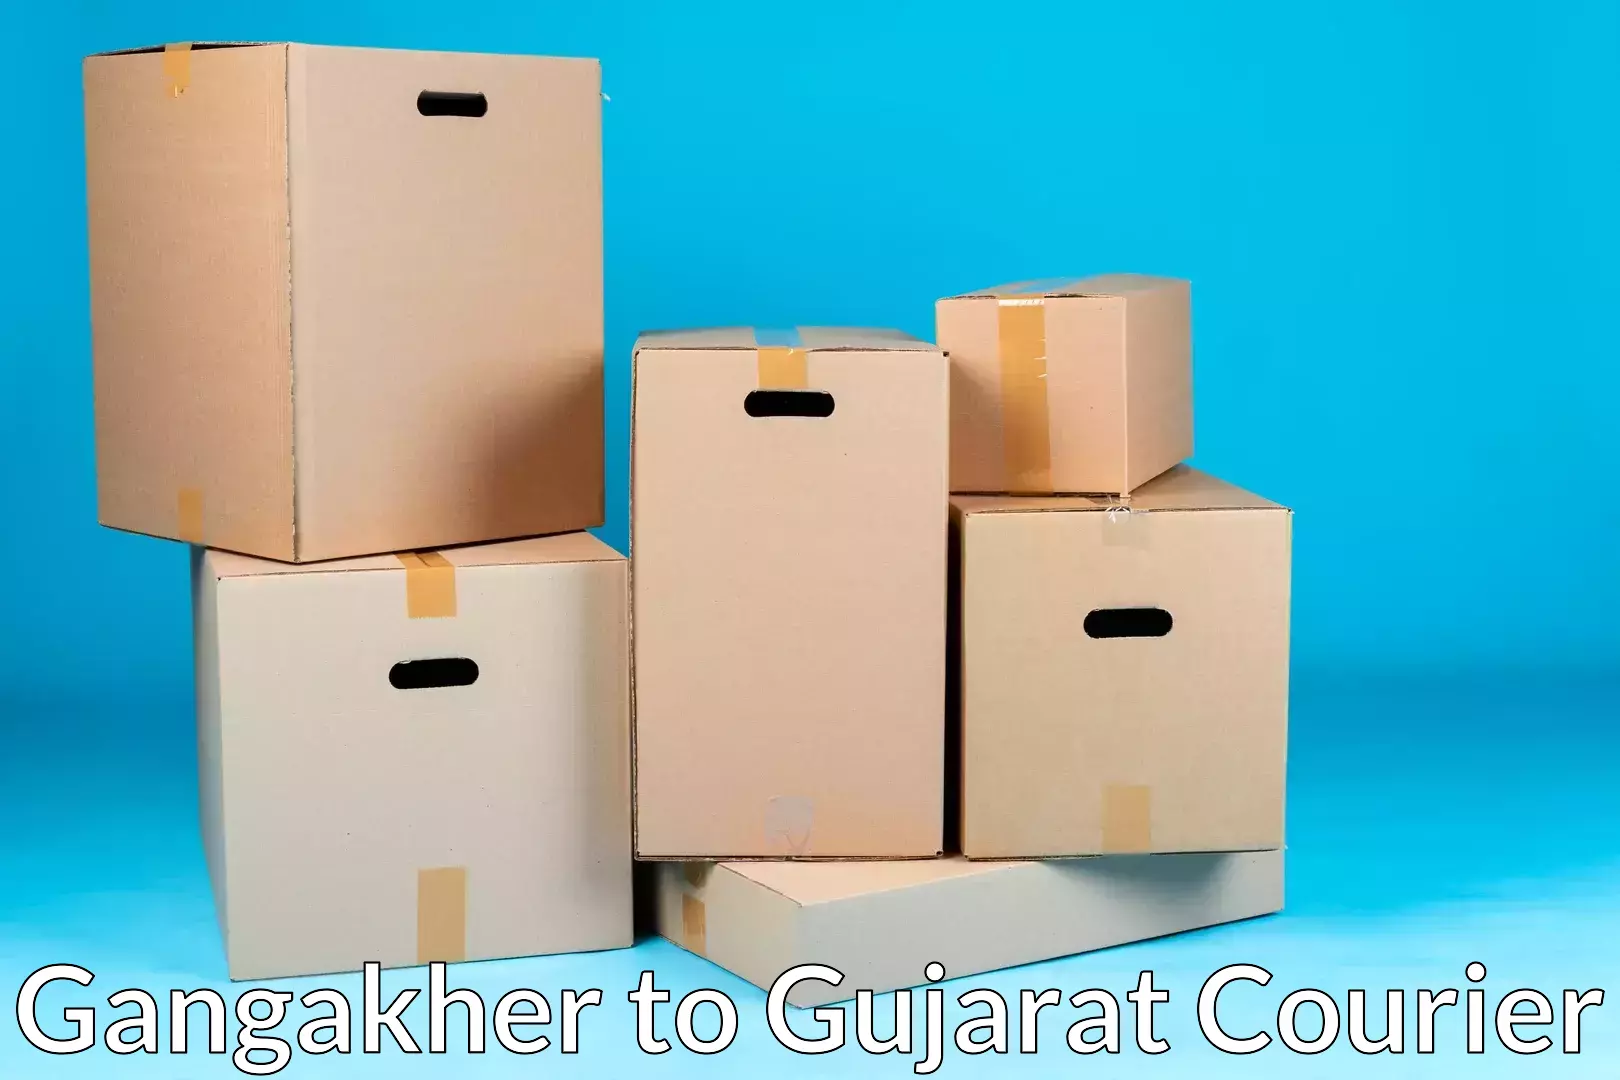 Furniture moving specialists Gangakher to Jetpur